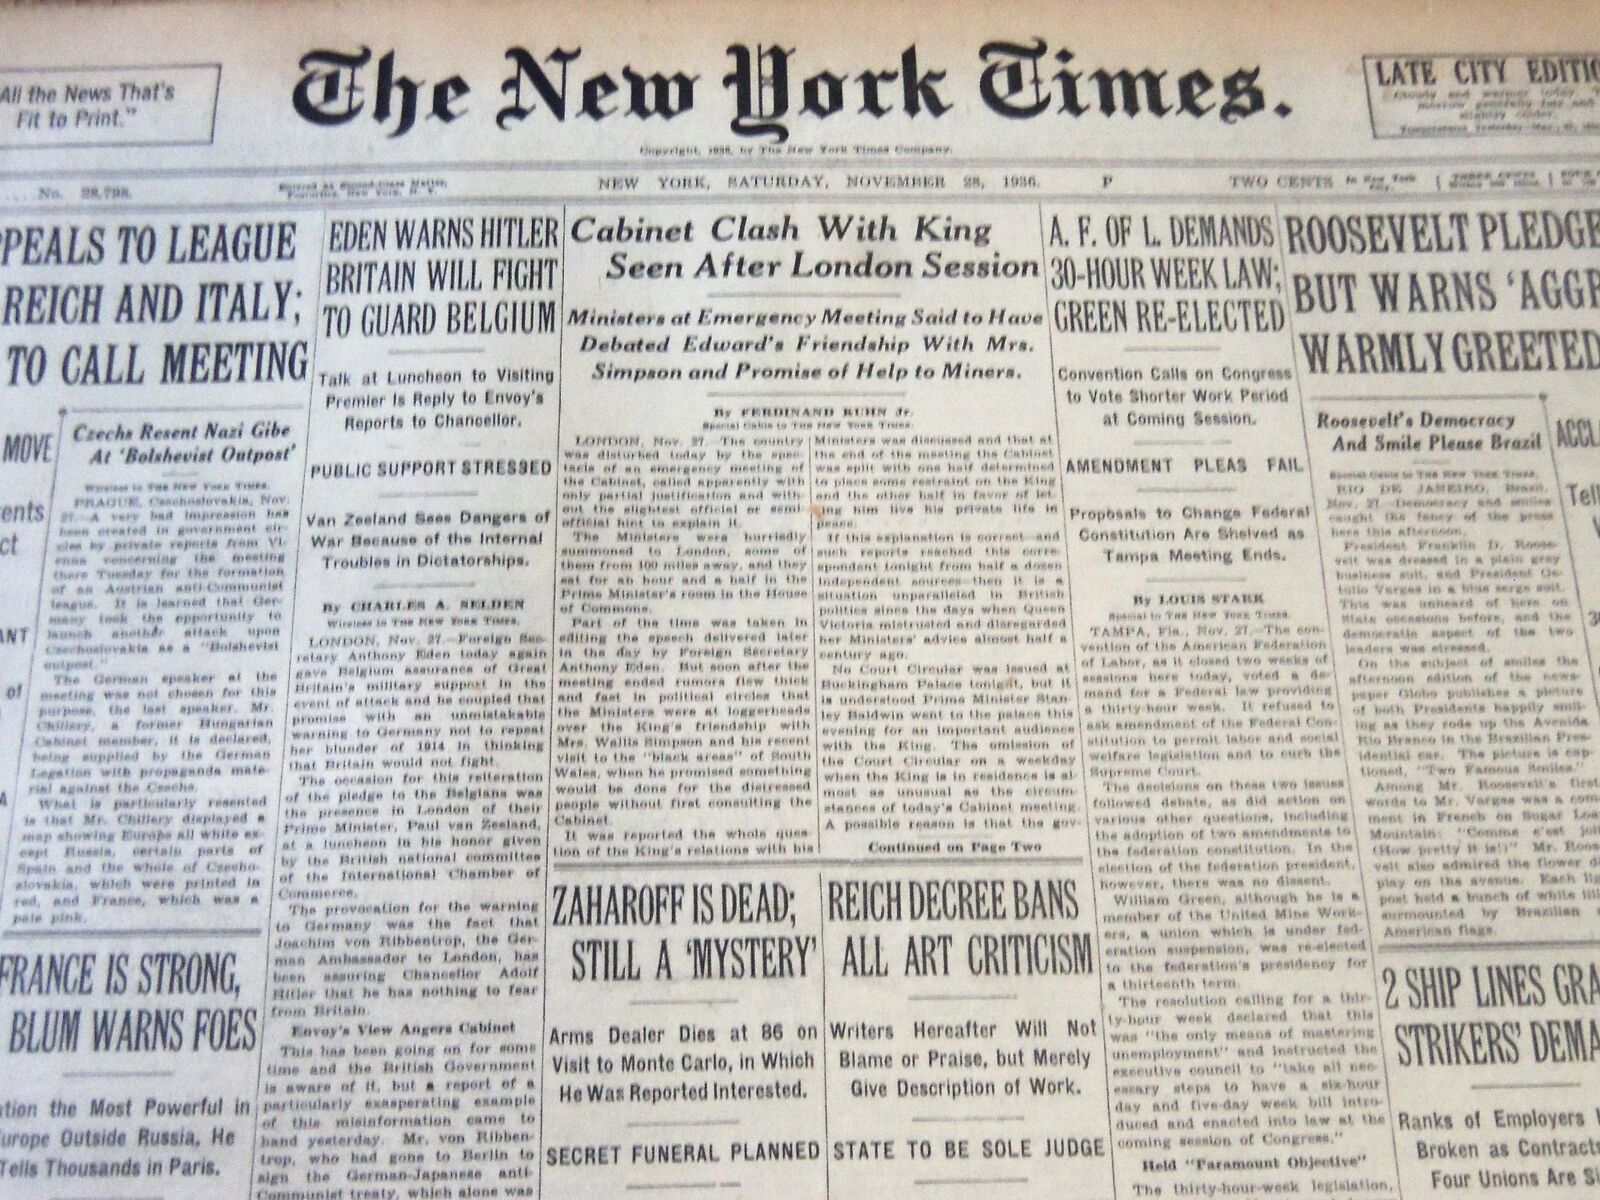 1936 NOV 28 NEW YORK TIMES - CABINET CLASH KING AFTER LONDON SESSION - NT 6706